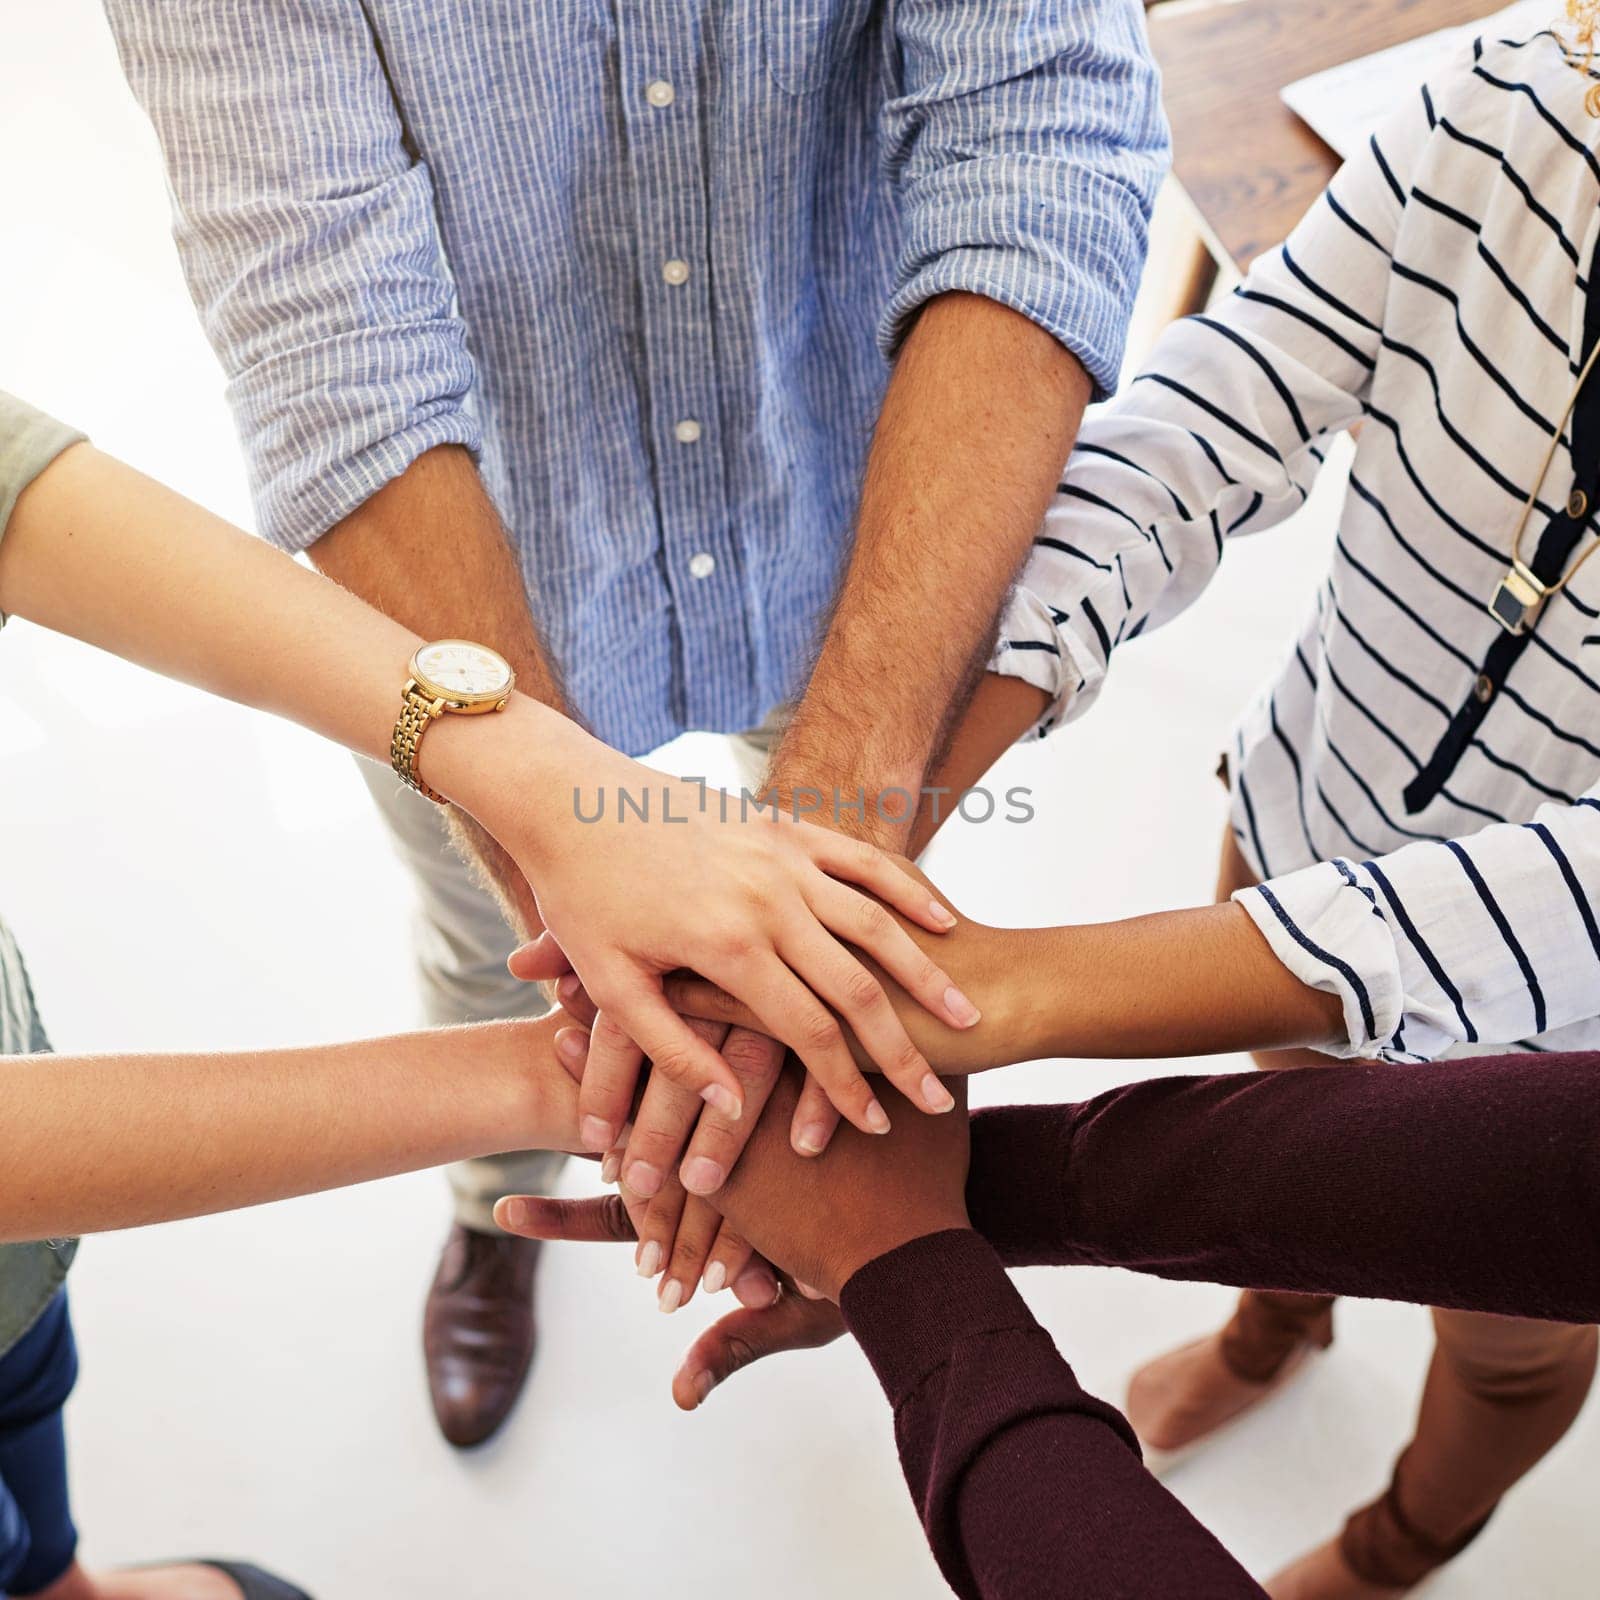 Business people, hands and unity in collaboration for teamwork, goal or diversity above at the workplace. Hand of group piling in team trust for community, motivation or agreement together.